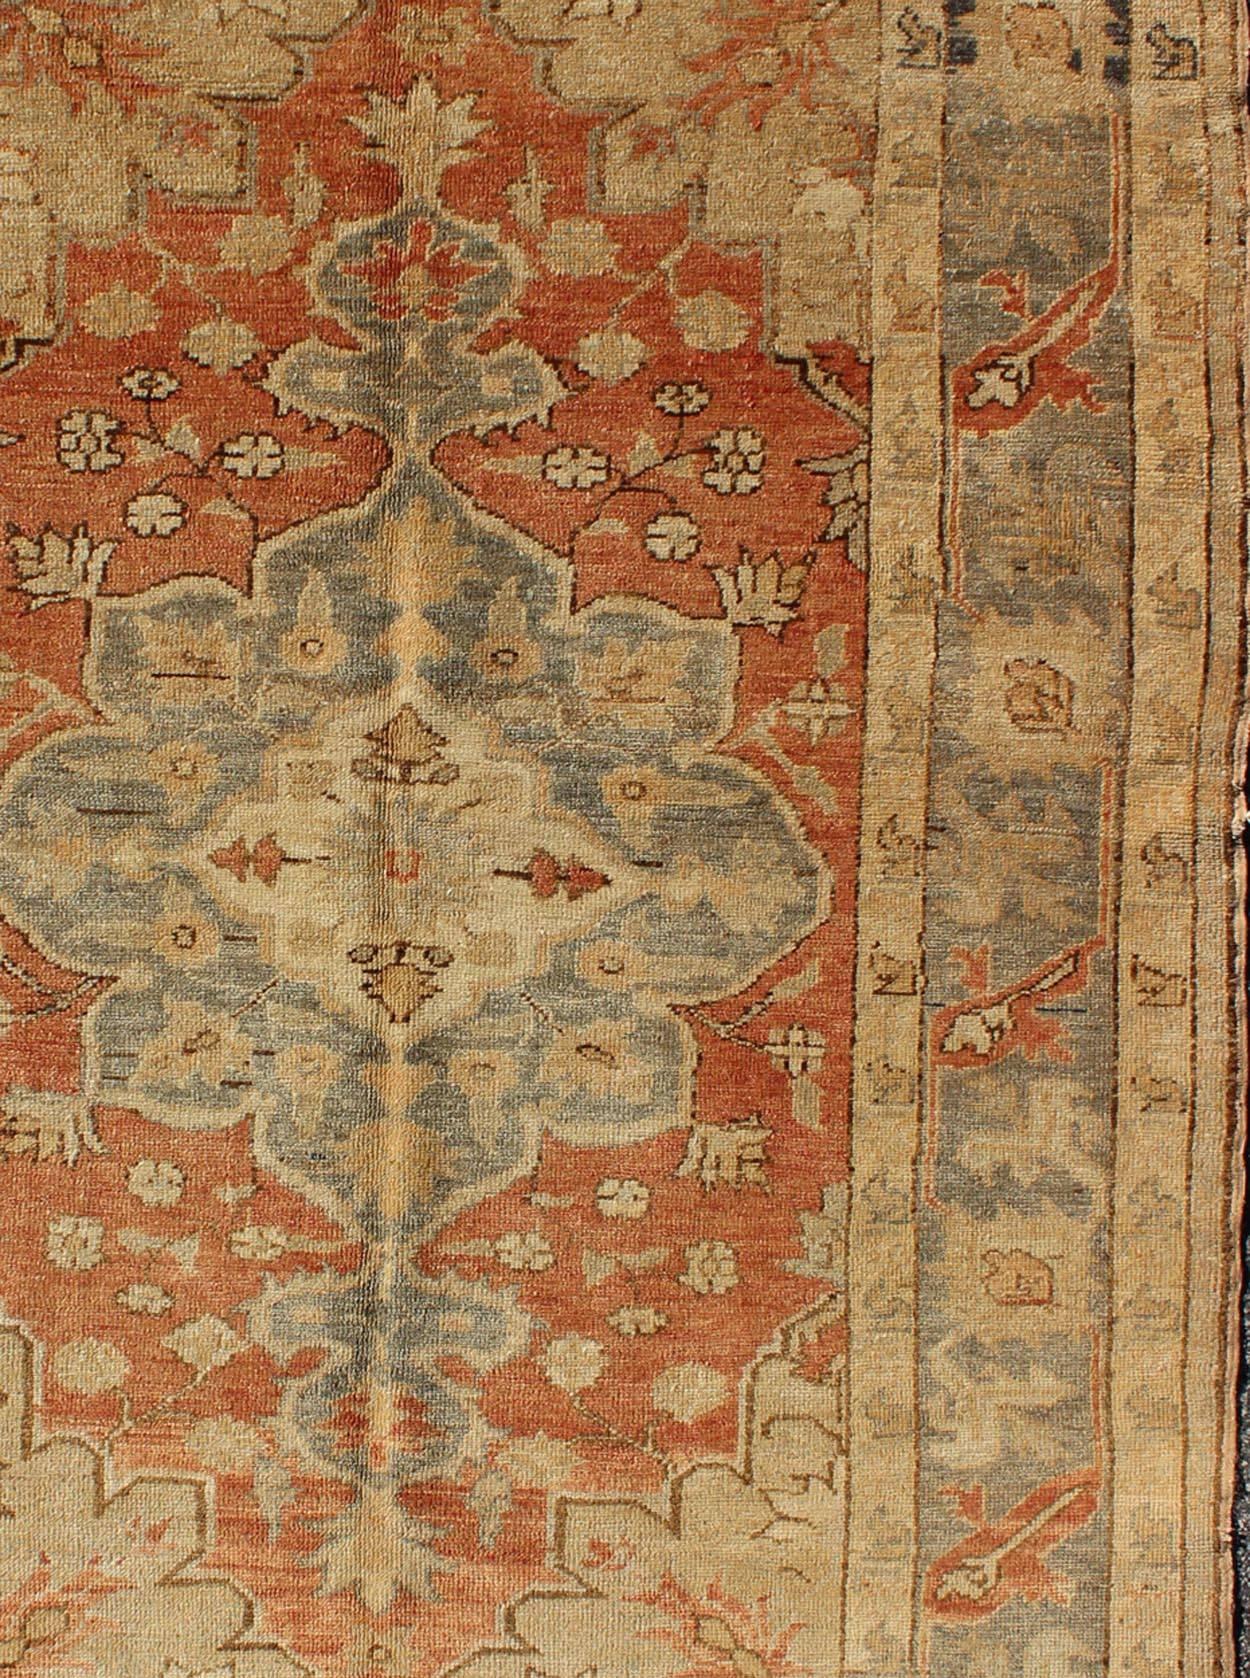 Antique Turkish Oushak Rug with Floral Motifs in Soft Orange, Grey and Taupe In Good Condition For Sale In Atlanta, GA